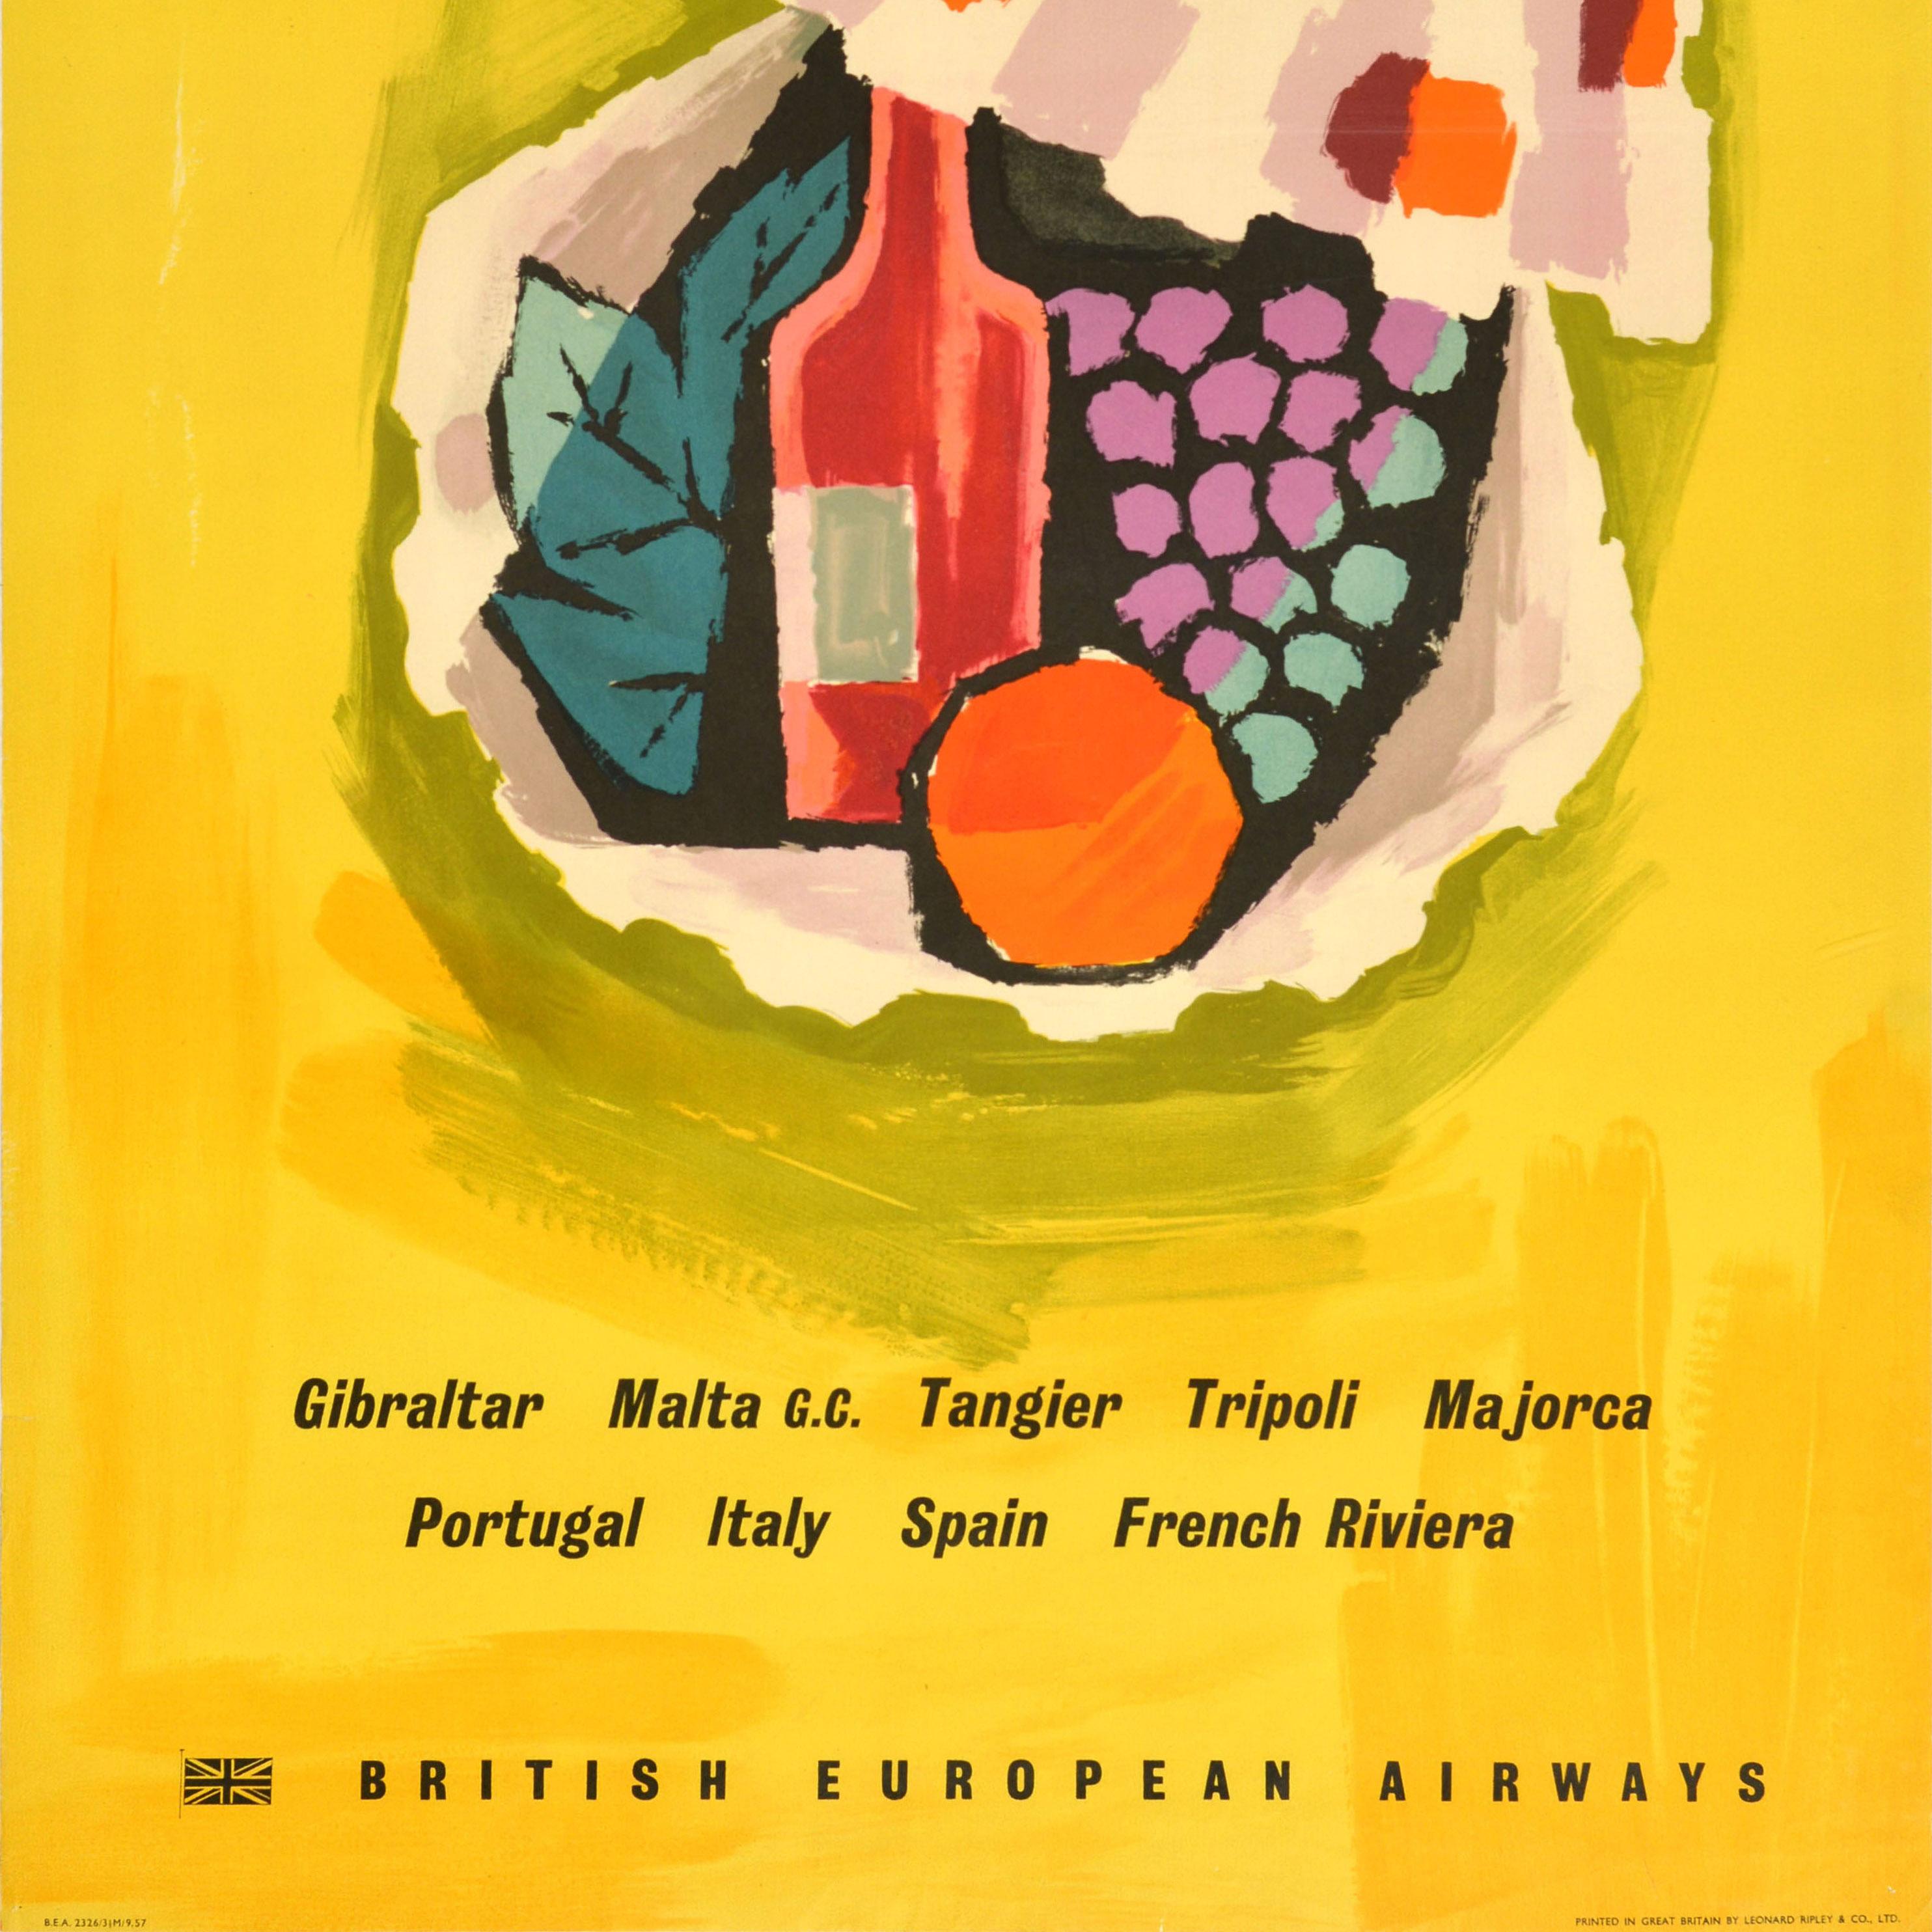 Original vintage travel poster - Fly BEA to the Sun Gibraltar Malta Tangier Tripoli Majorca Portugal Italy Spain French Riviera - featuring a colourful graphic design by the notable poster artist, mosaicist and illustrator Hans Unger (1915-75) of